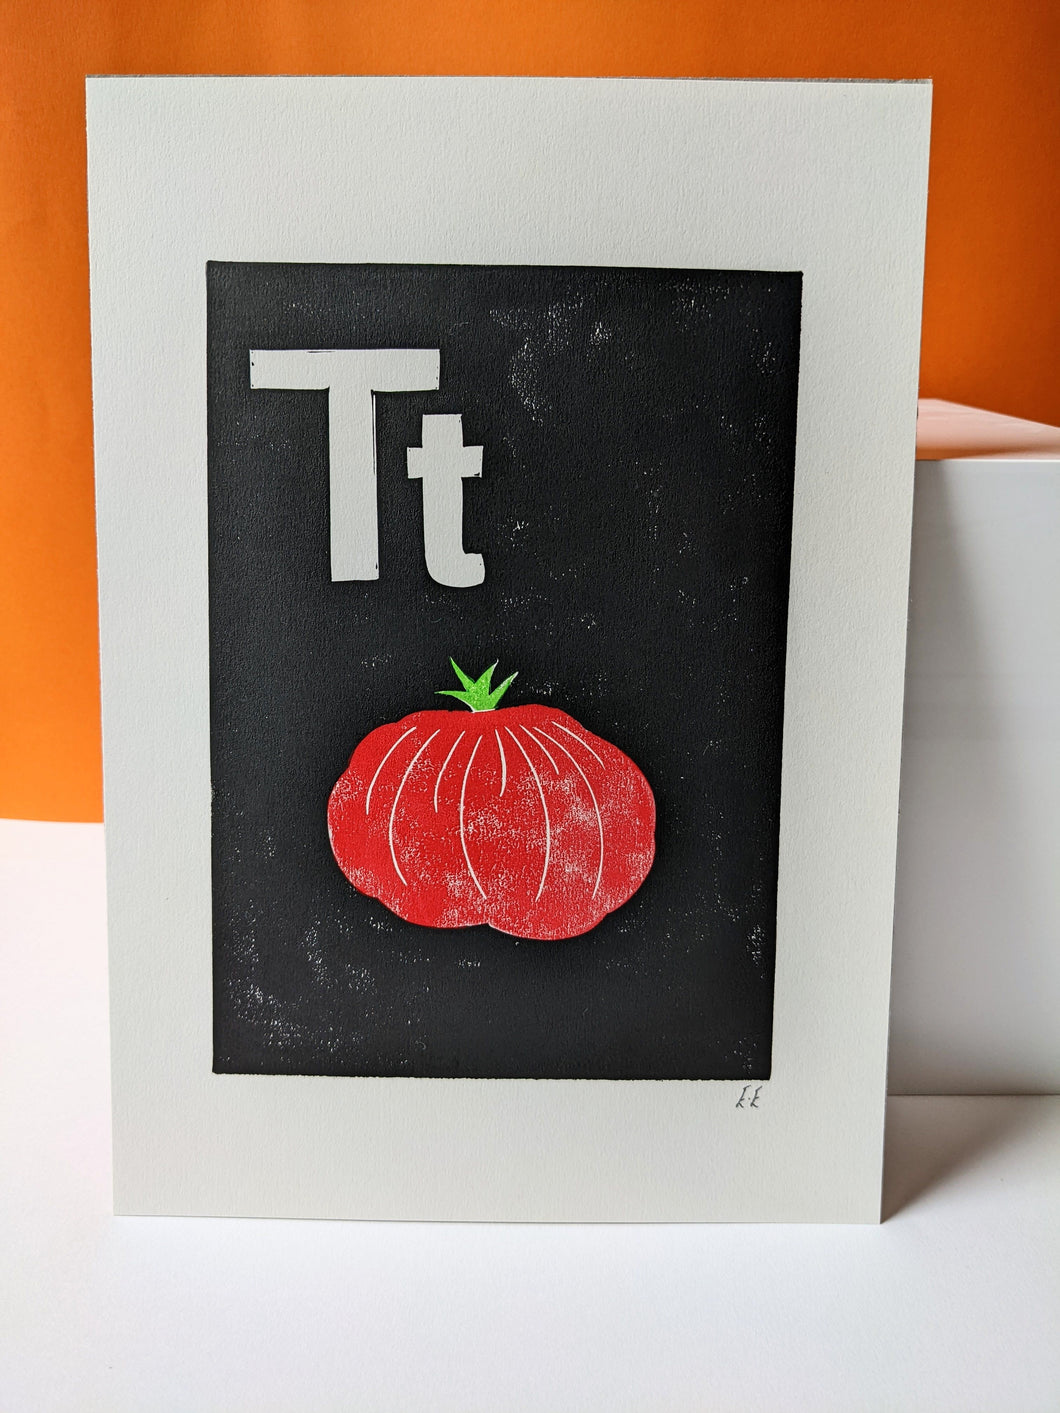 A black print with a red tomato and the letter T carved out of it in white